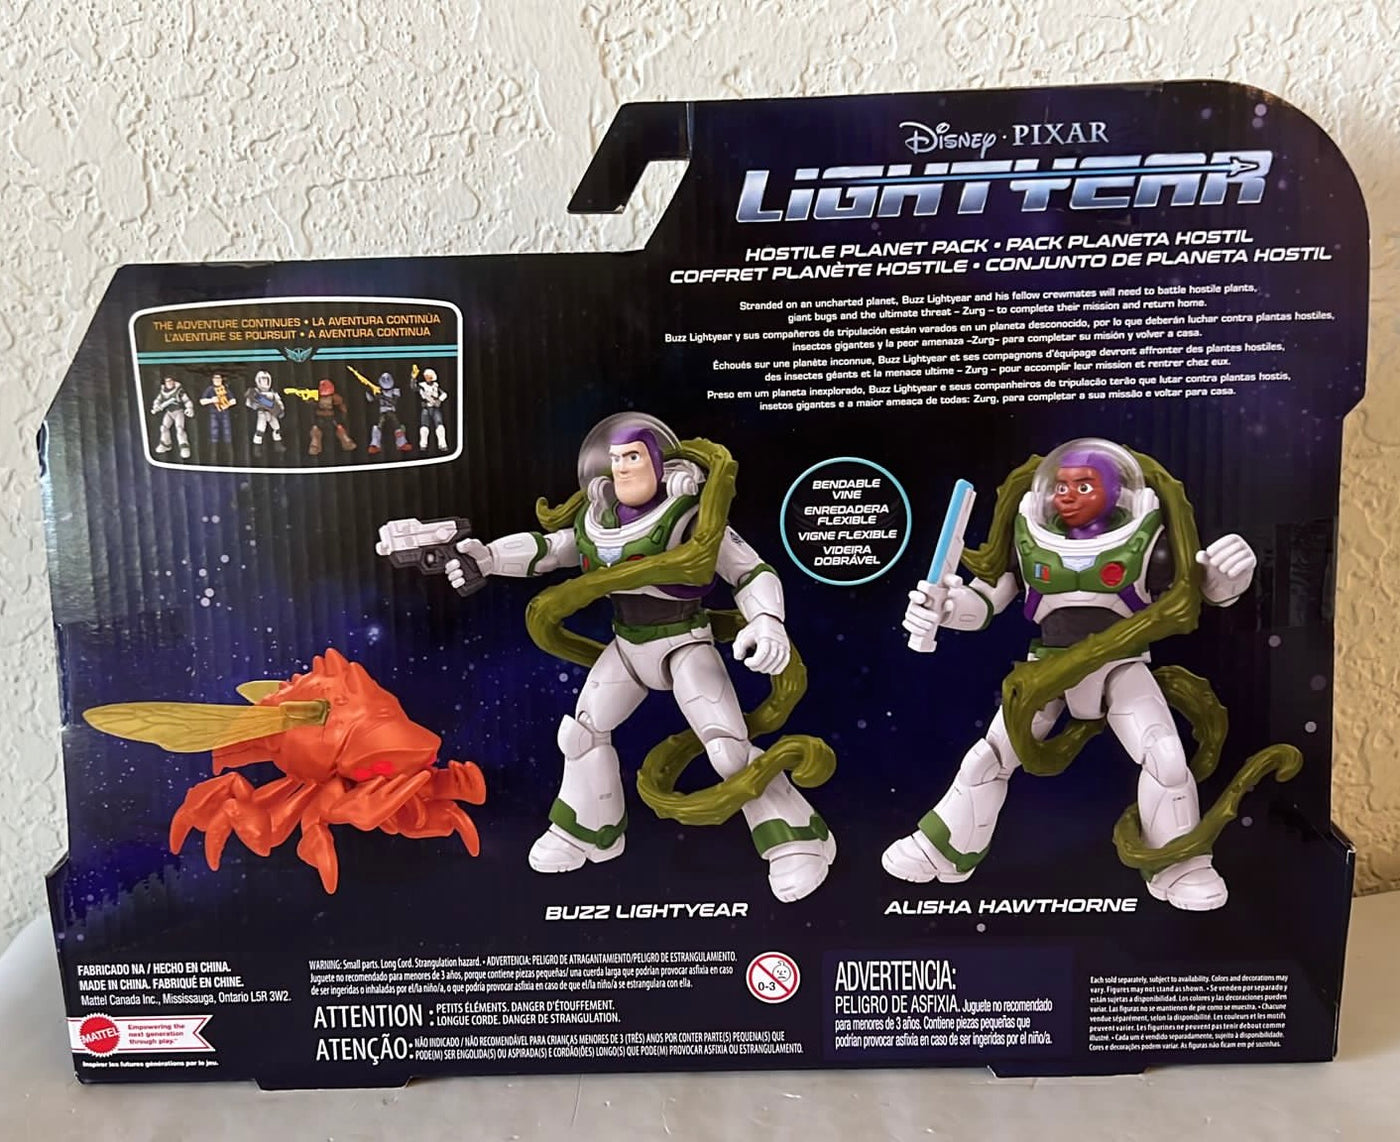 Disney and Pixar Lightyear Kohl's Hostile Planet Pack Figures New with Box